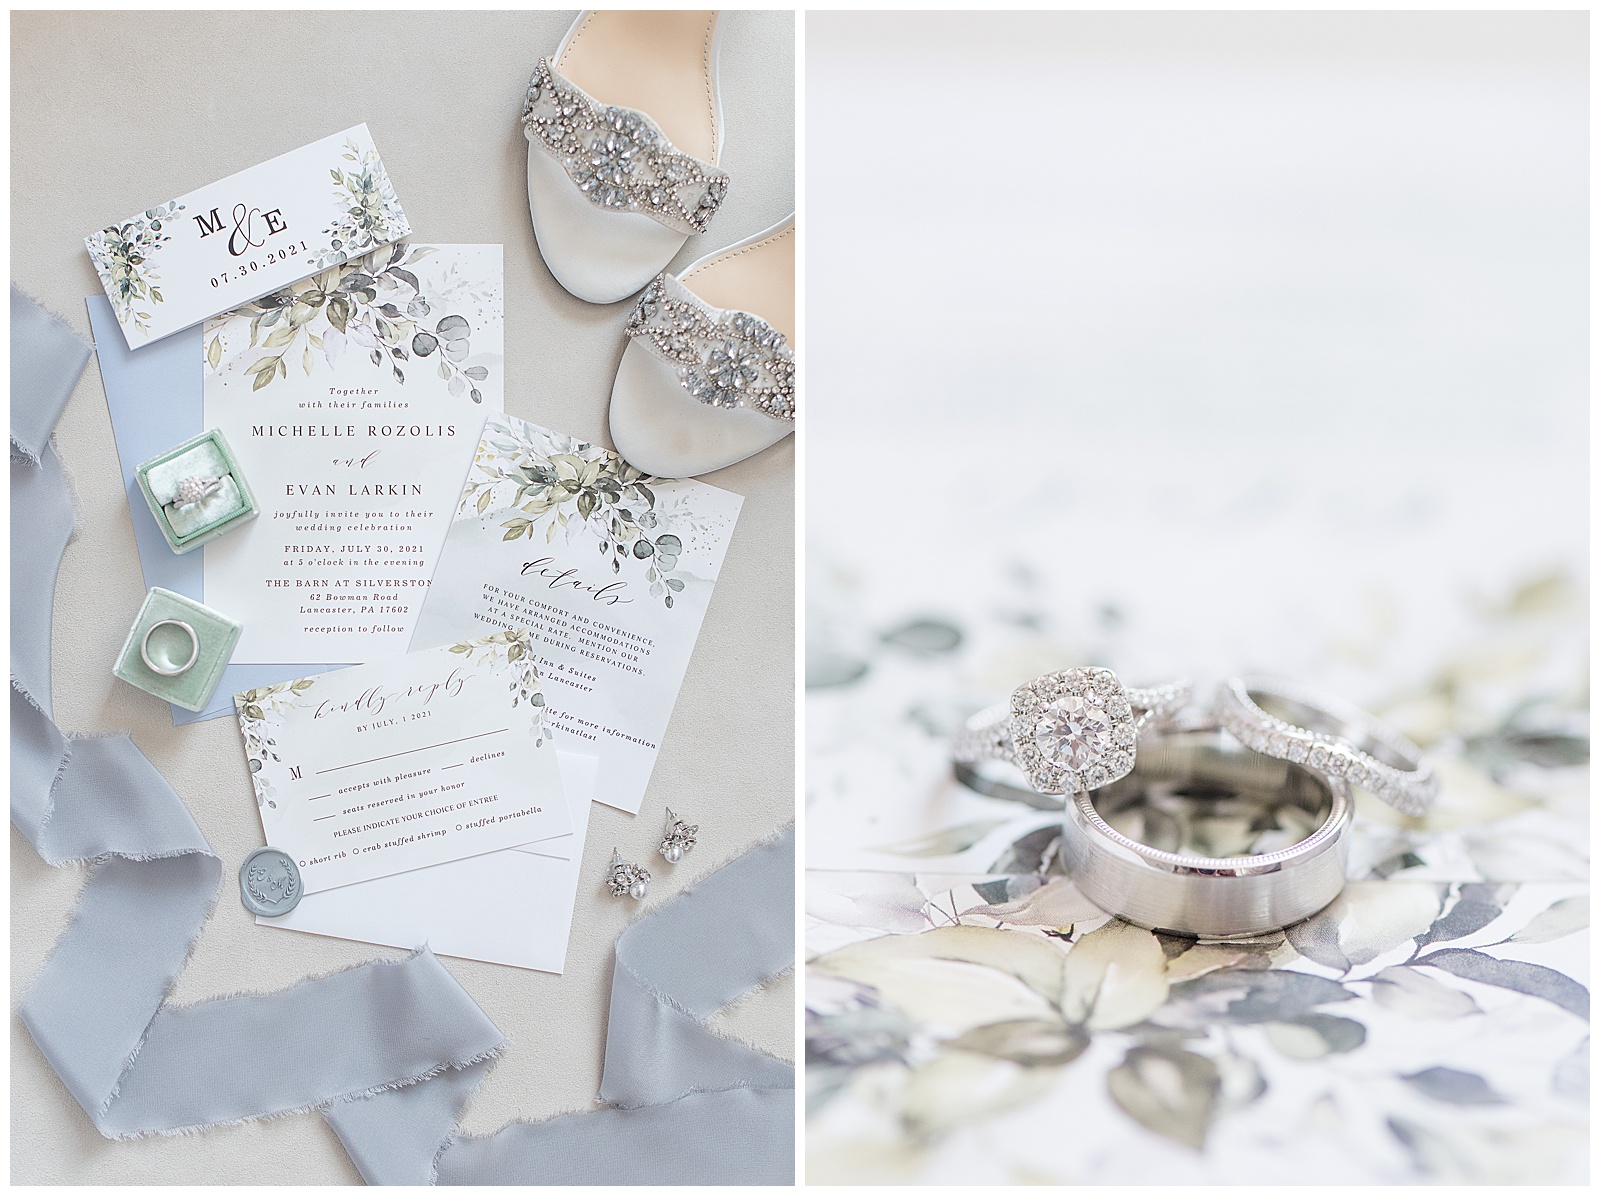 wedding invitation, bride's shoes, and wedding rings all on display with blue florals and blue ribbon